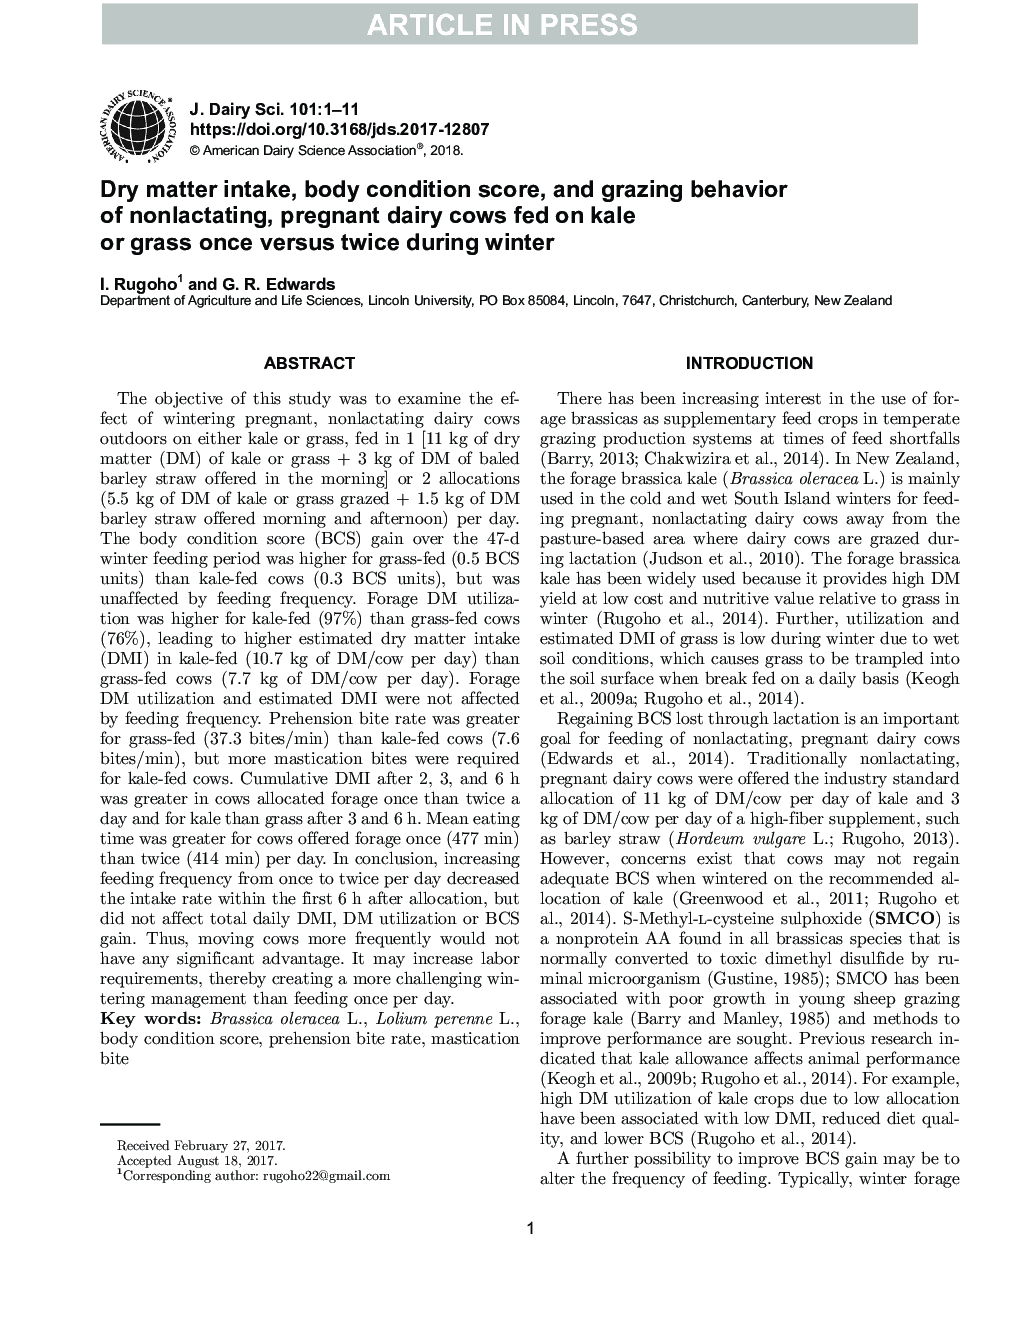 Dry matter intake, body condition score, and grazing behavior of nonlactating, pregnant dairy cows fed kale or grass once versus twice daily during winter